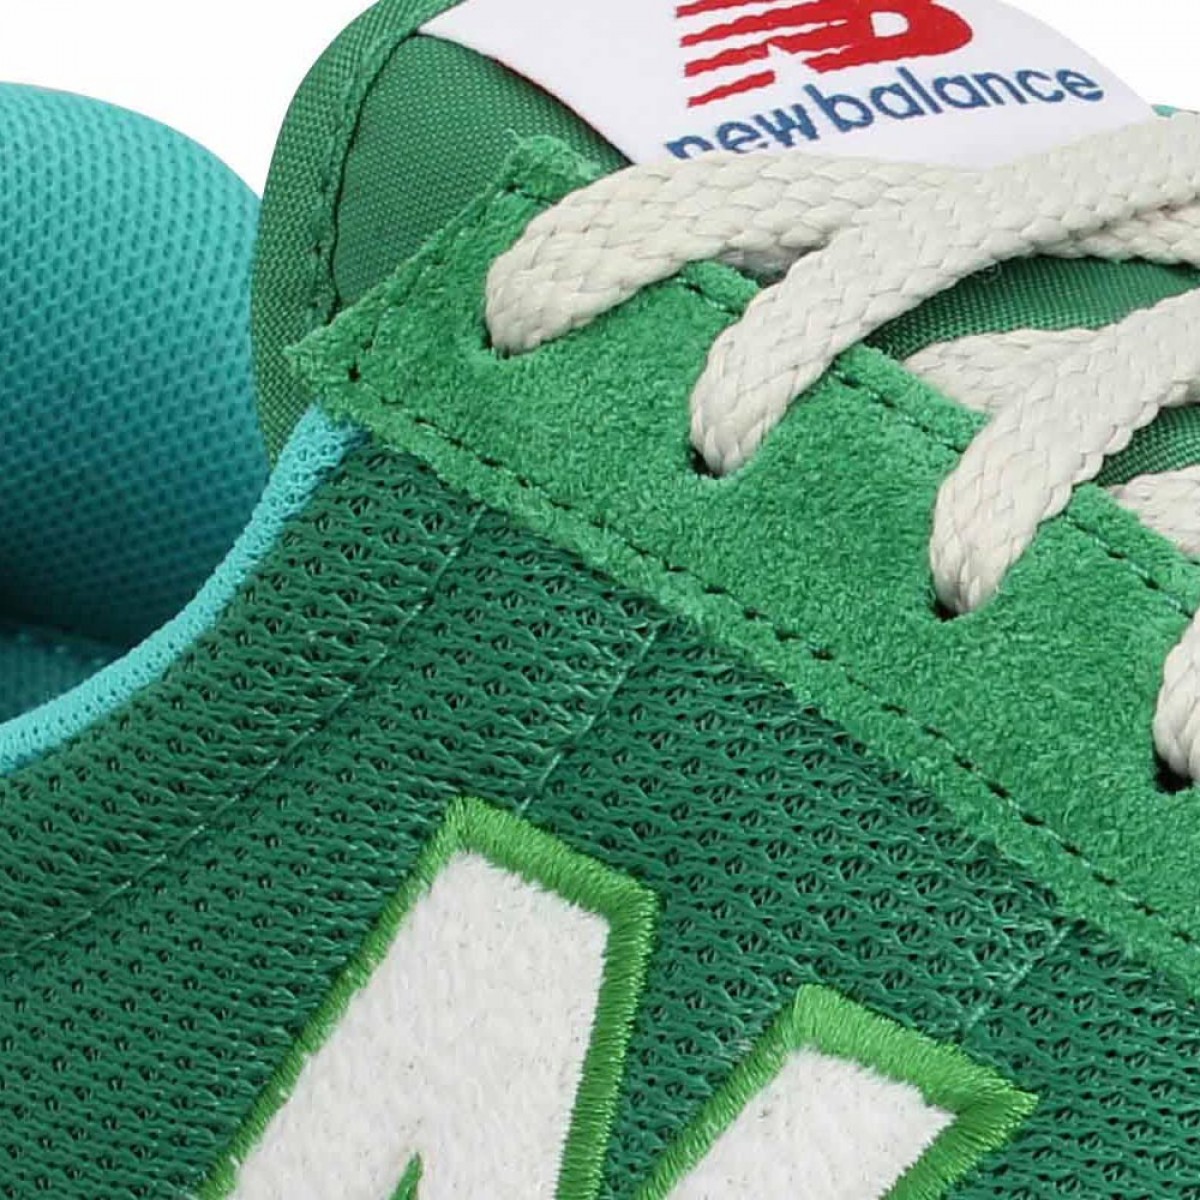 New balance 720 yb velours toile homme vert homme | Fanny chaussures